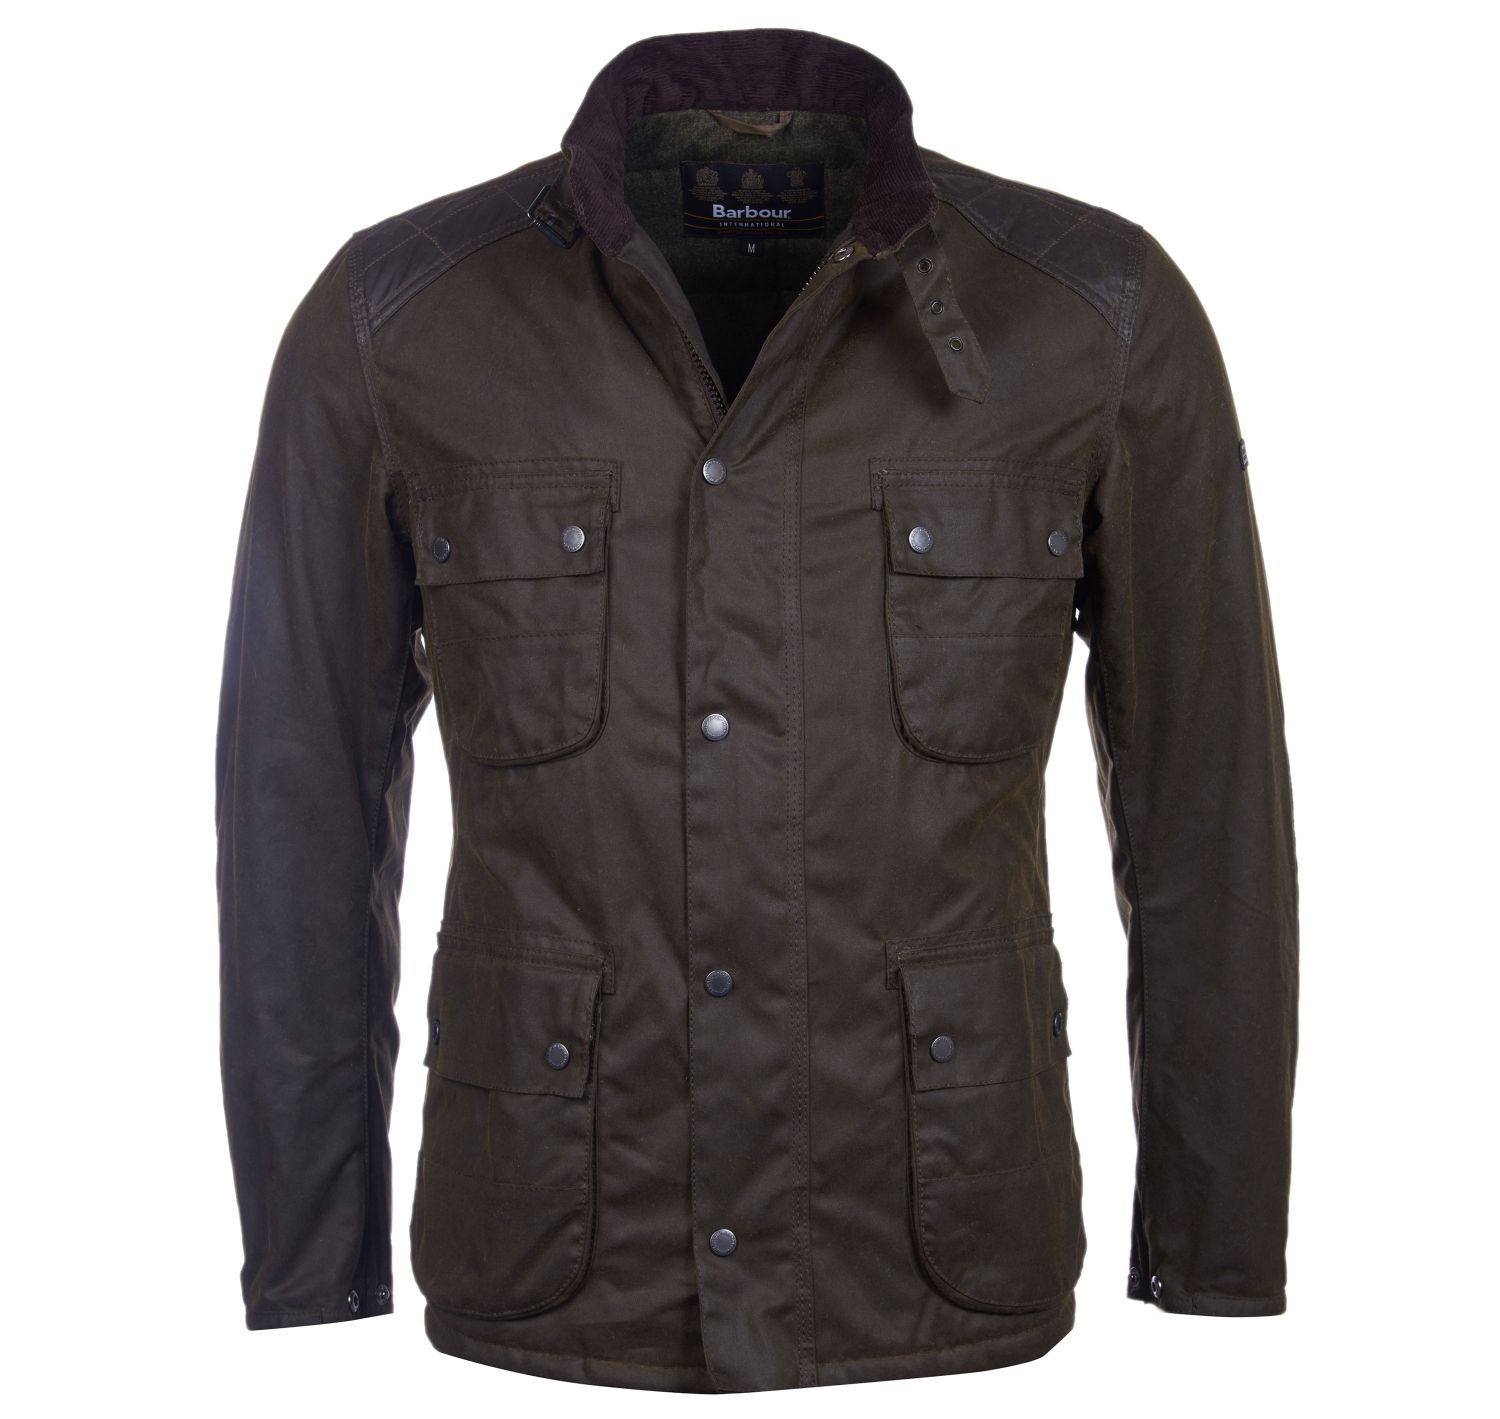 Barbour Weir Wax Jacket - Olive